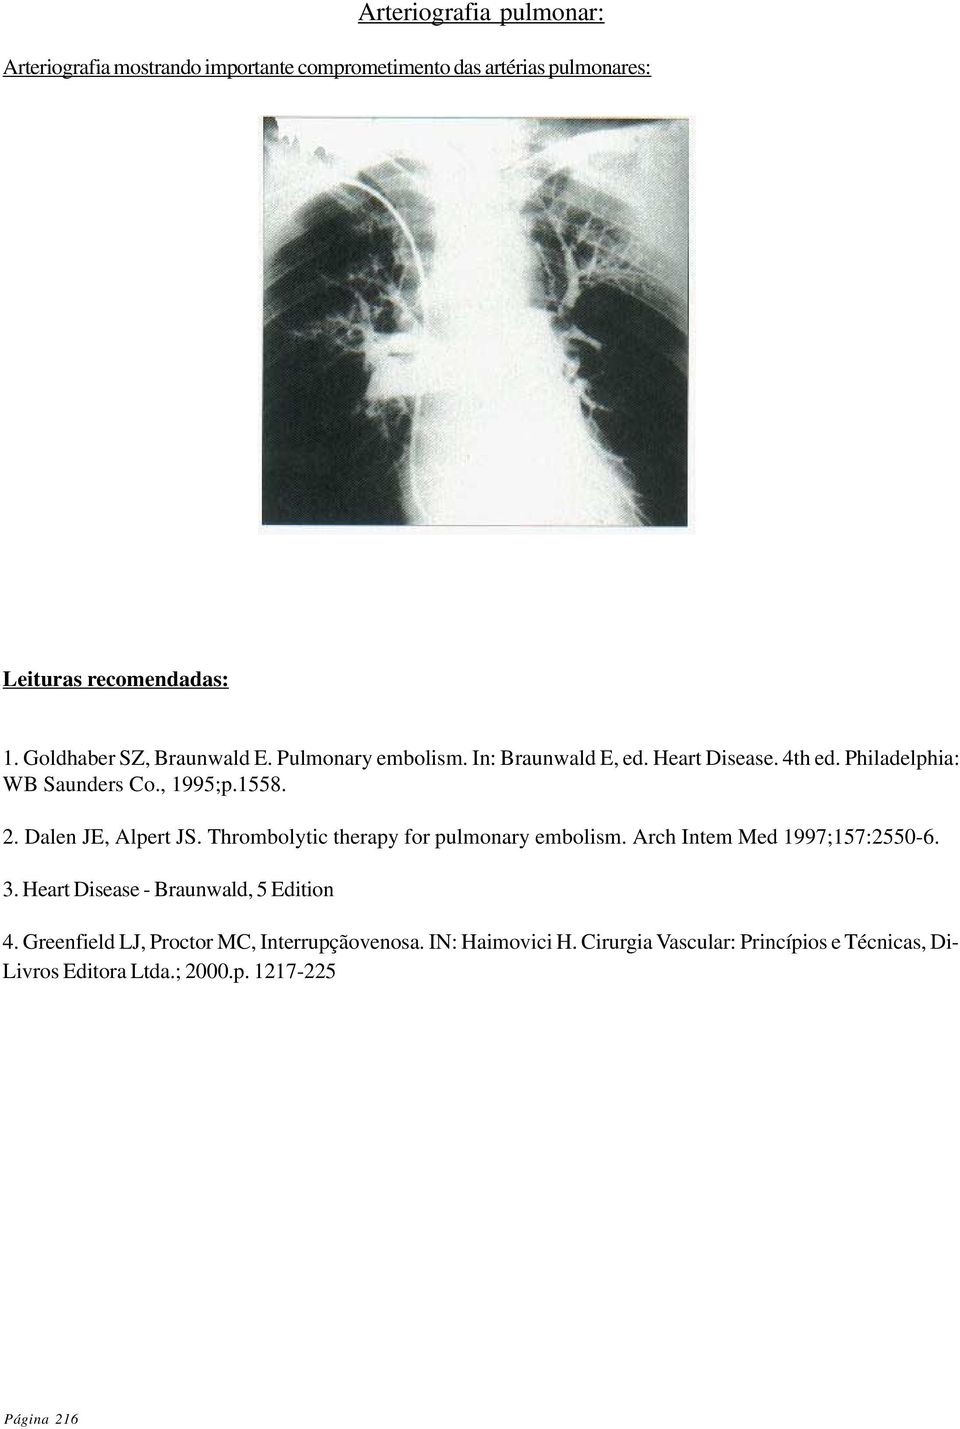 Dalen JE, Alpert JS. Thrombolytic therapy for pulmonary embolism. Arch Intem Med 1997;157:2550-6. 3. Heart Disease - Braunwald, 5 Edition 4.